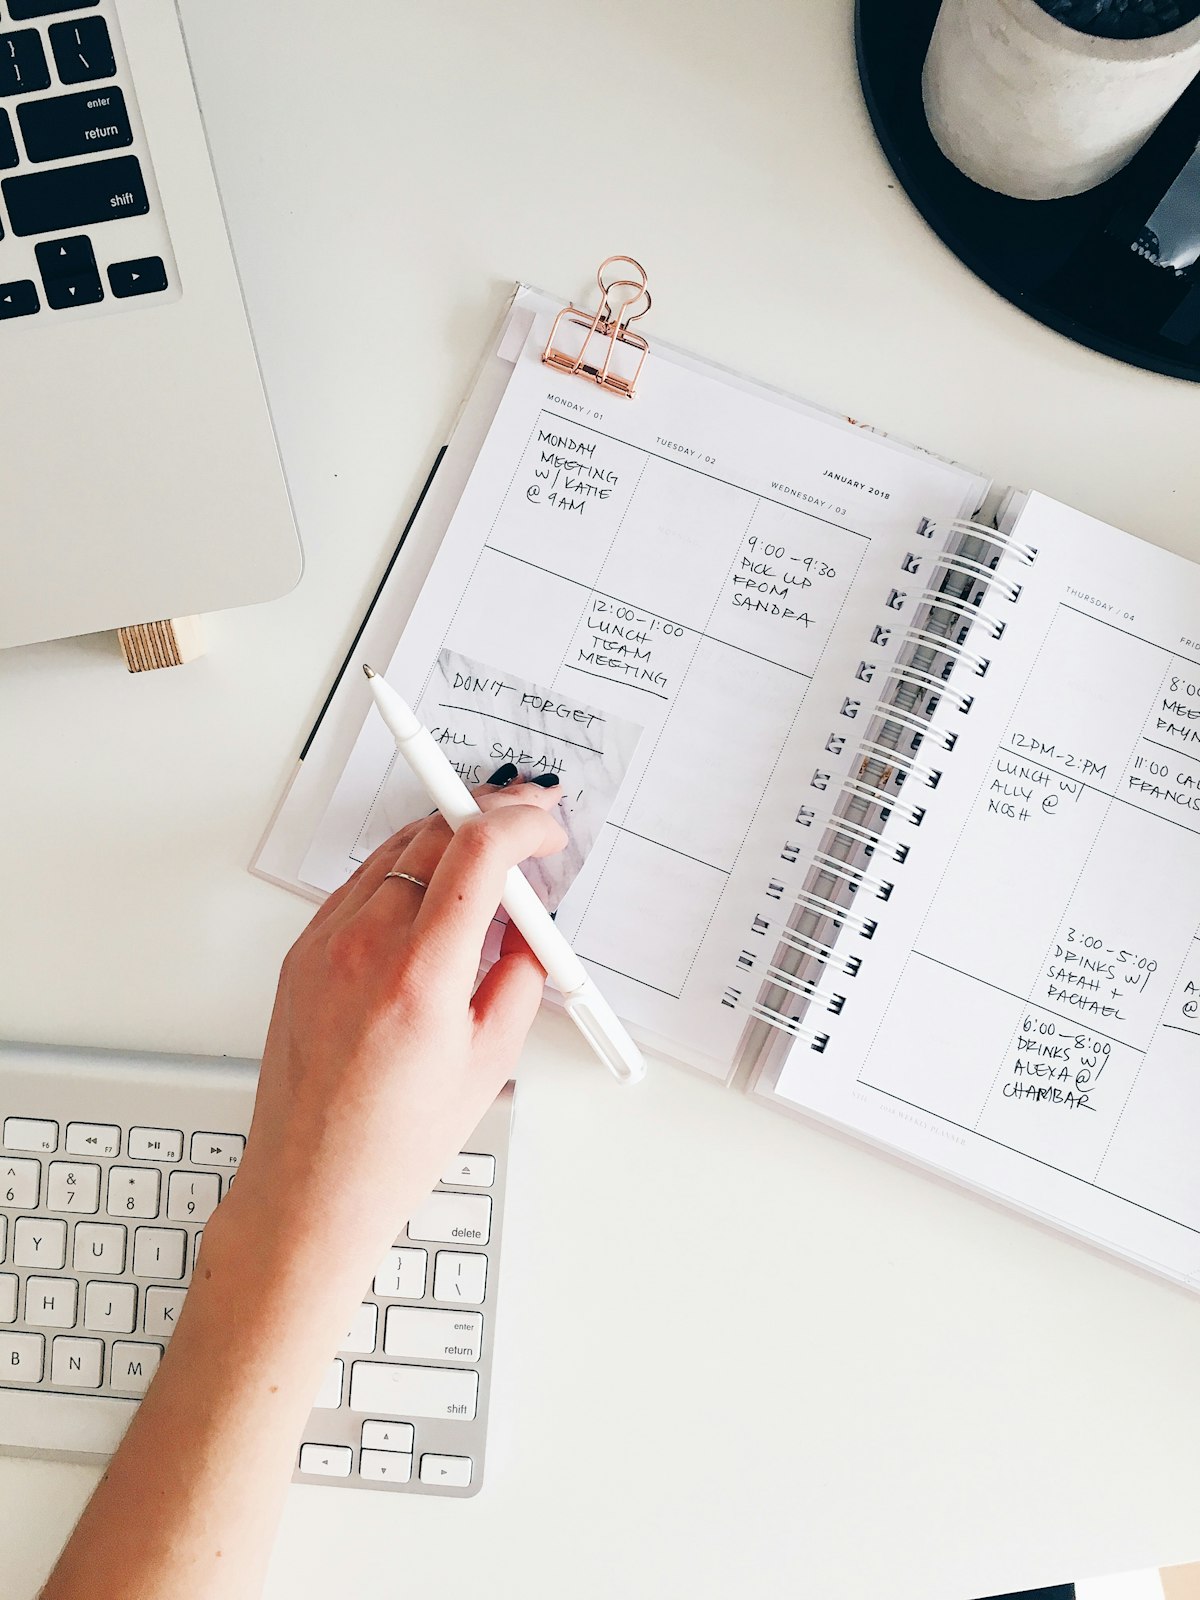 Hand writing in a planner with a keyboard nearby, signifying meticulous time management for busy professionals.